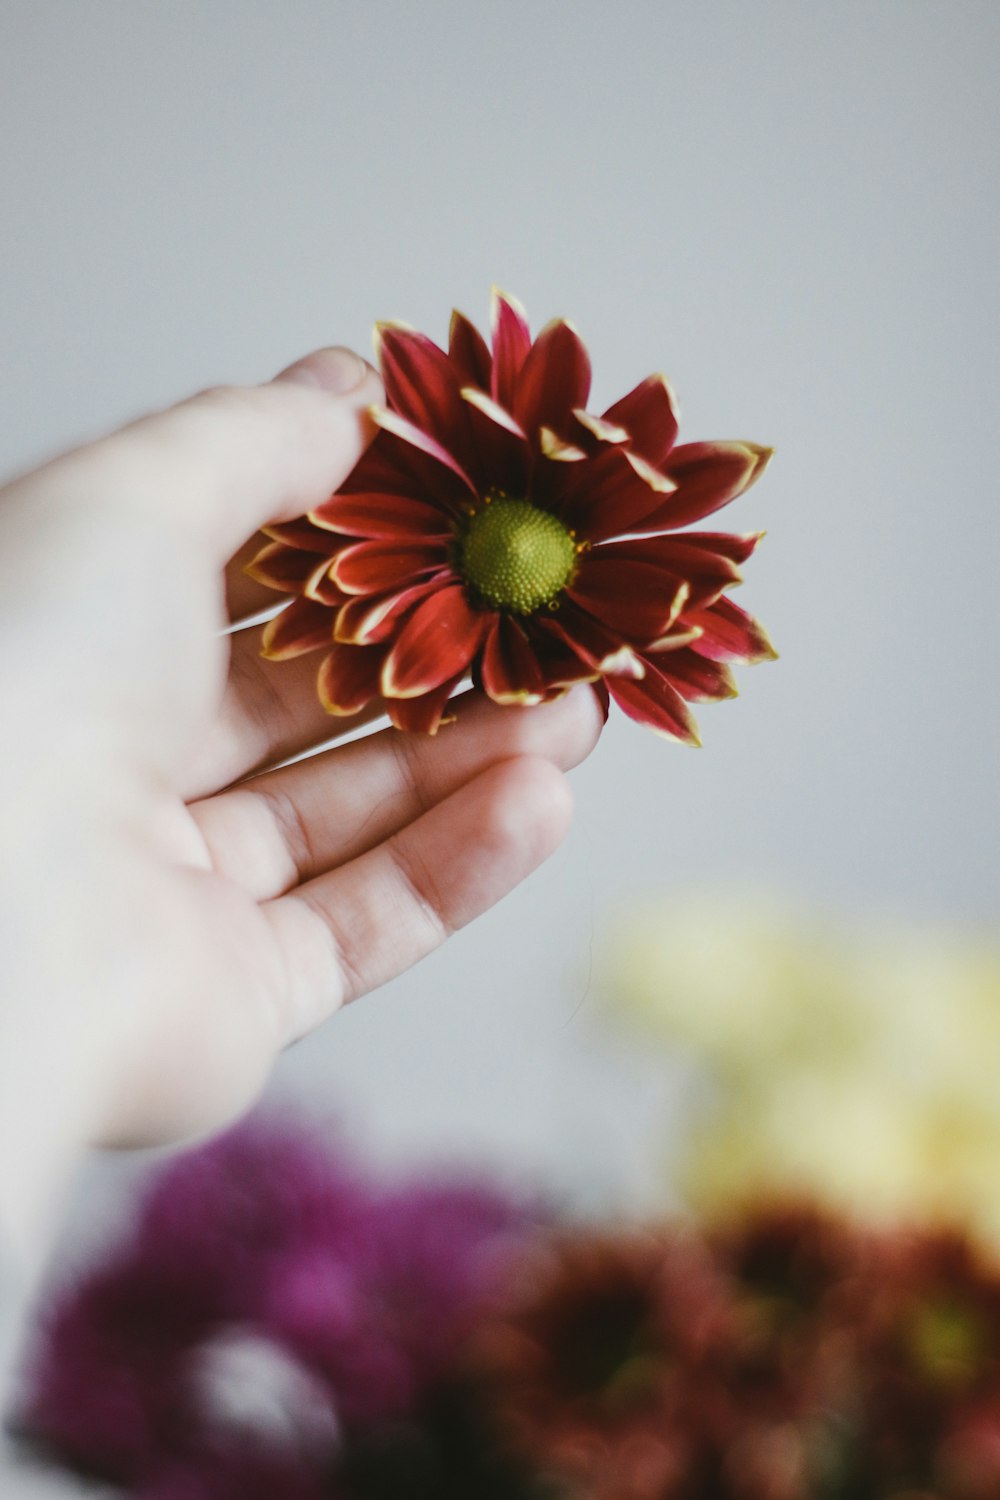 person holding red and yellow flower